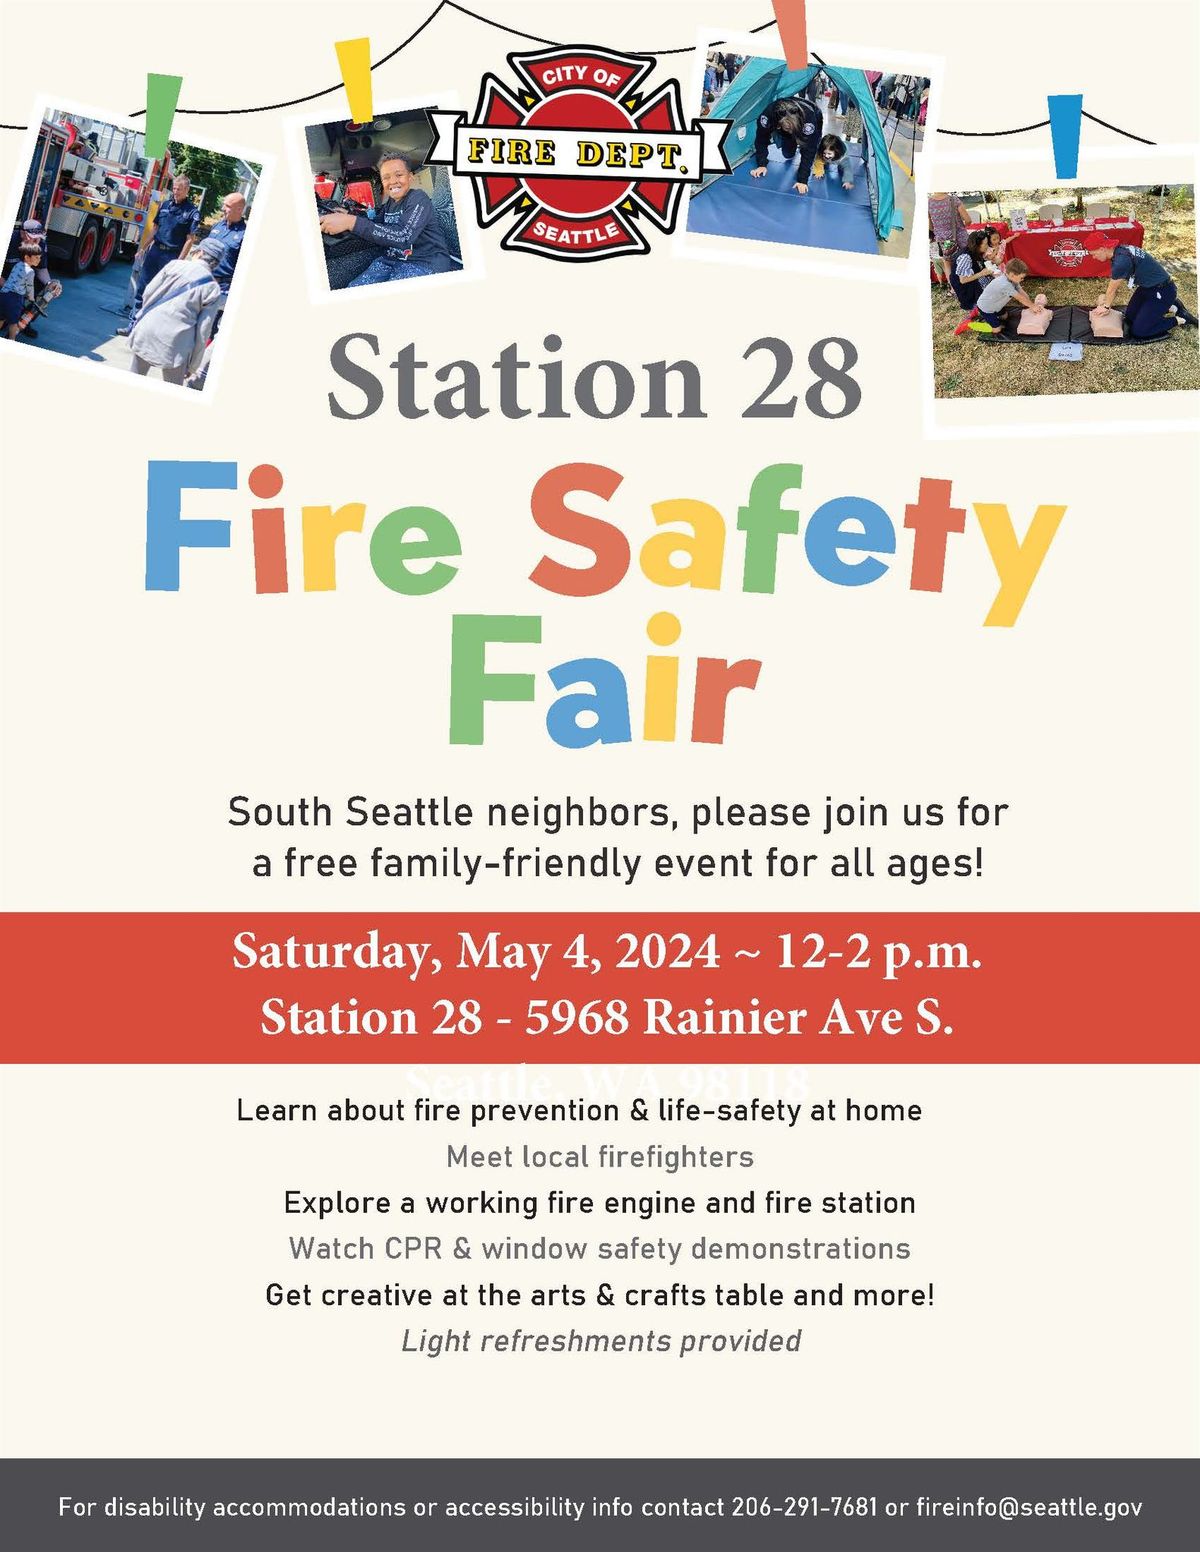 Fire Safety Fair at Station 28